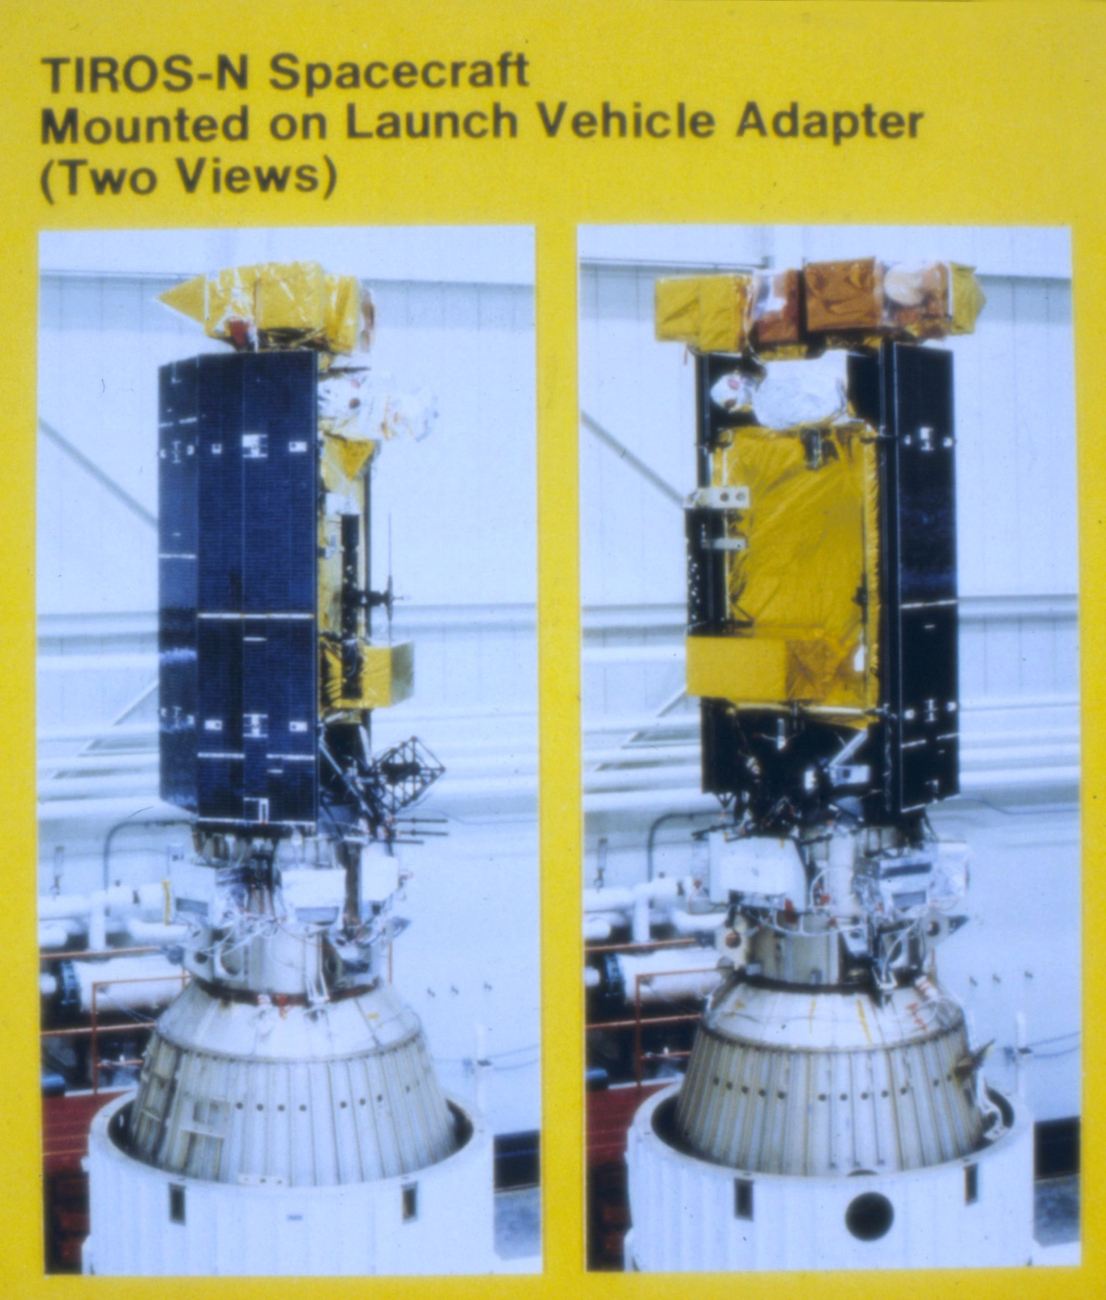 TIROS-N spacecraft mounted on launch vehicle adapter (two views)